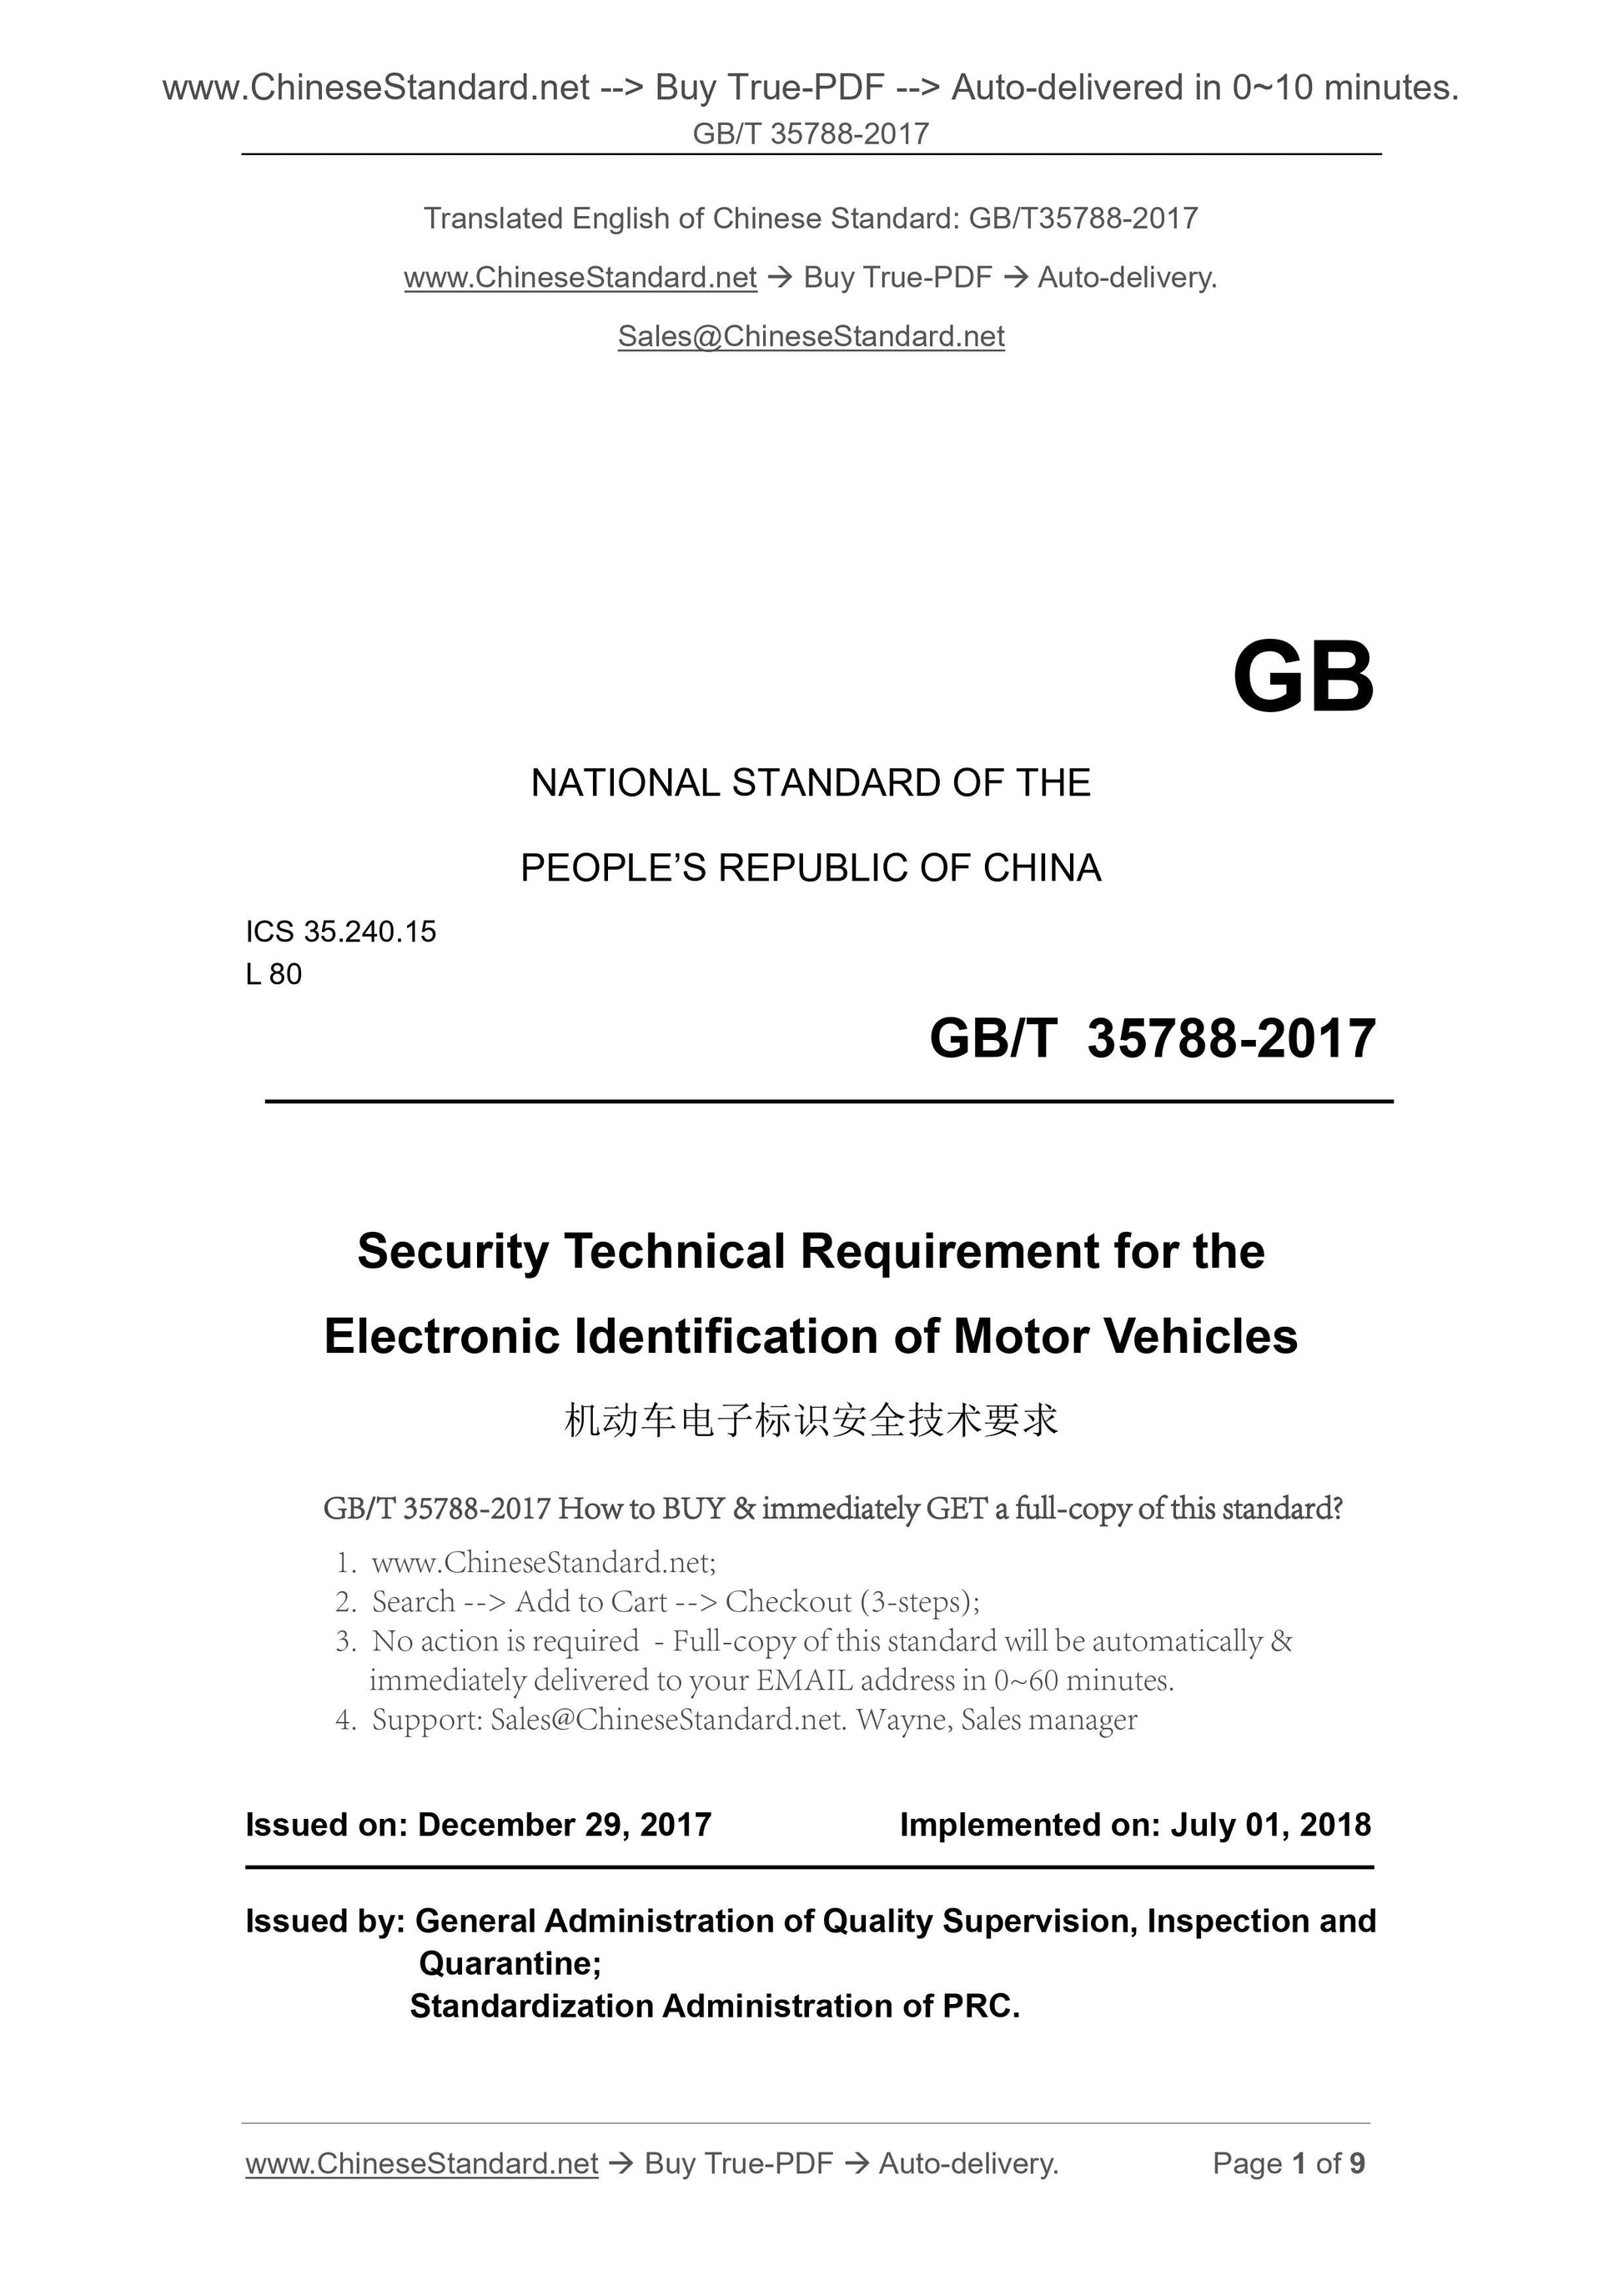 GB/T 35788-2017 Page 1